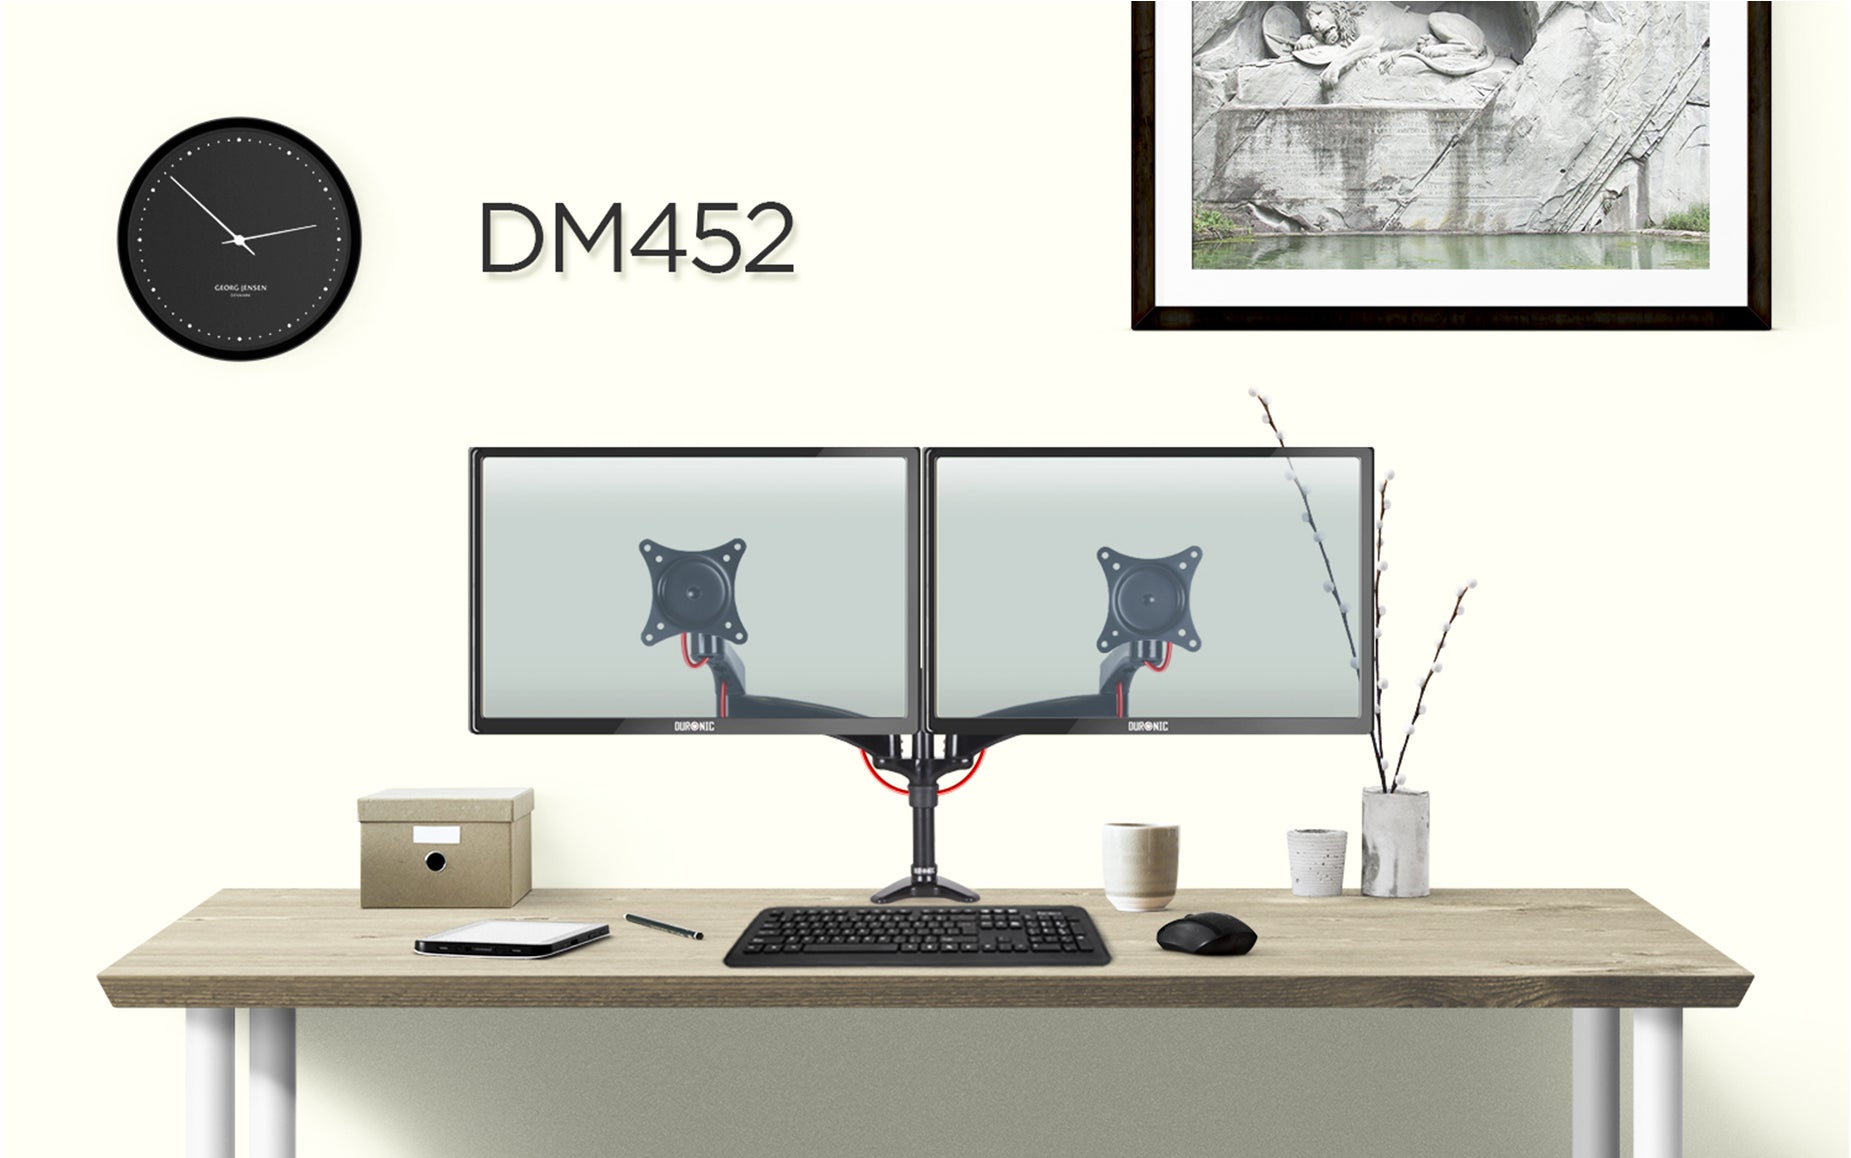 dm452, black, desk, mount, bracket, stand, support, riser, arm, double, two, twin, duo, dual, office, computer